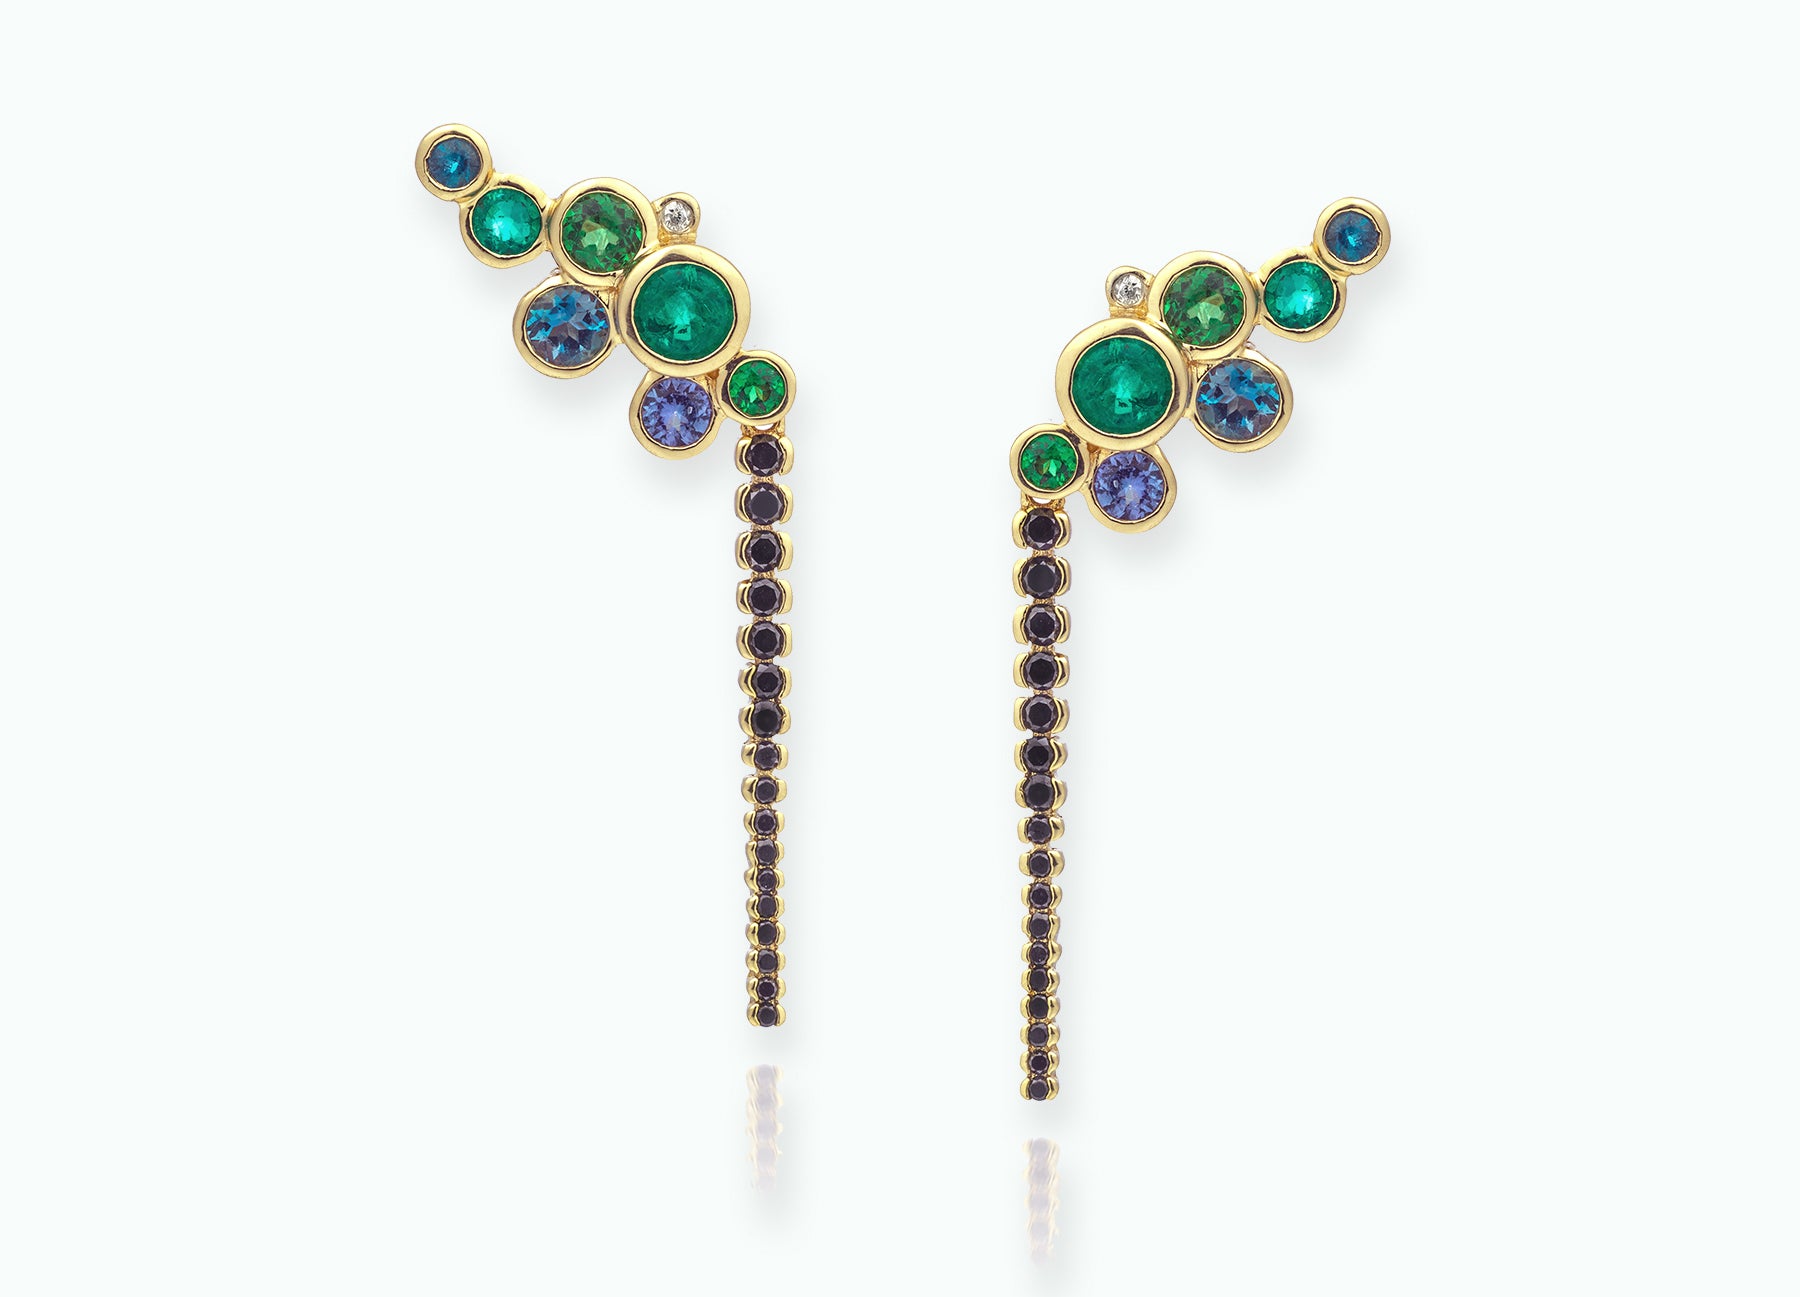 EMERALD BUBBLE EARRINGS WITH BLACK DIAMOND EXTENSION DROPS